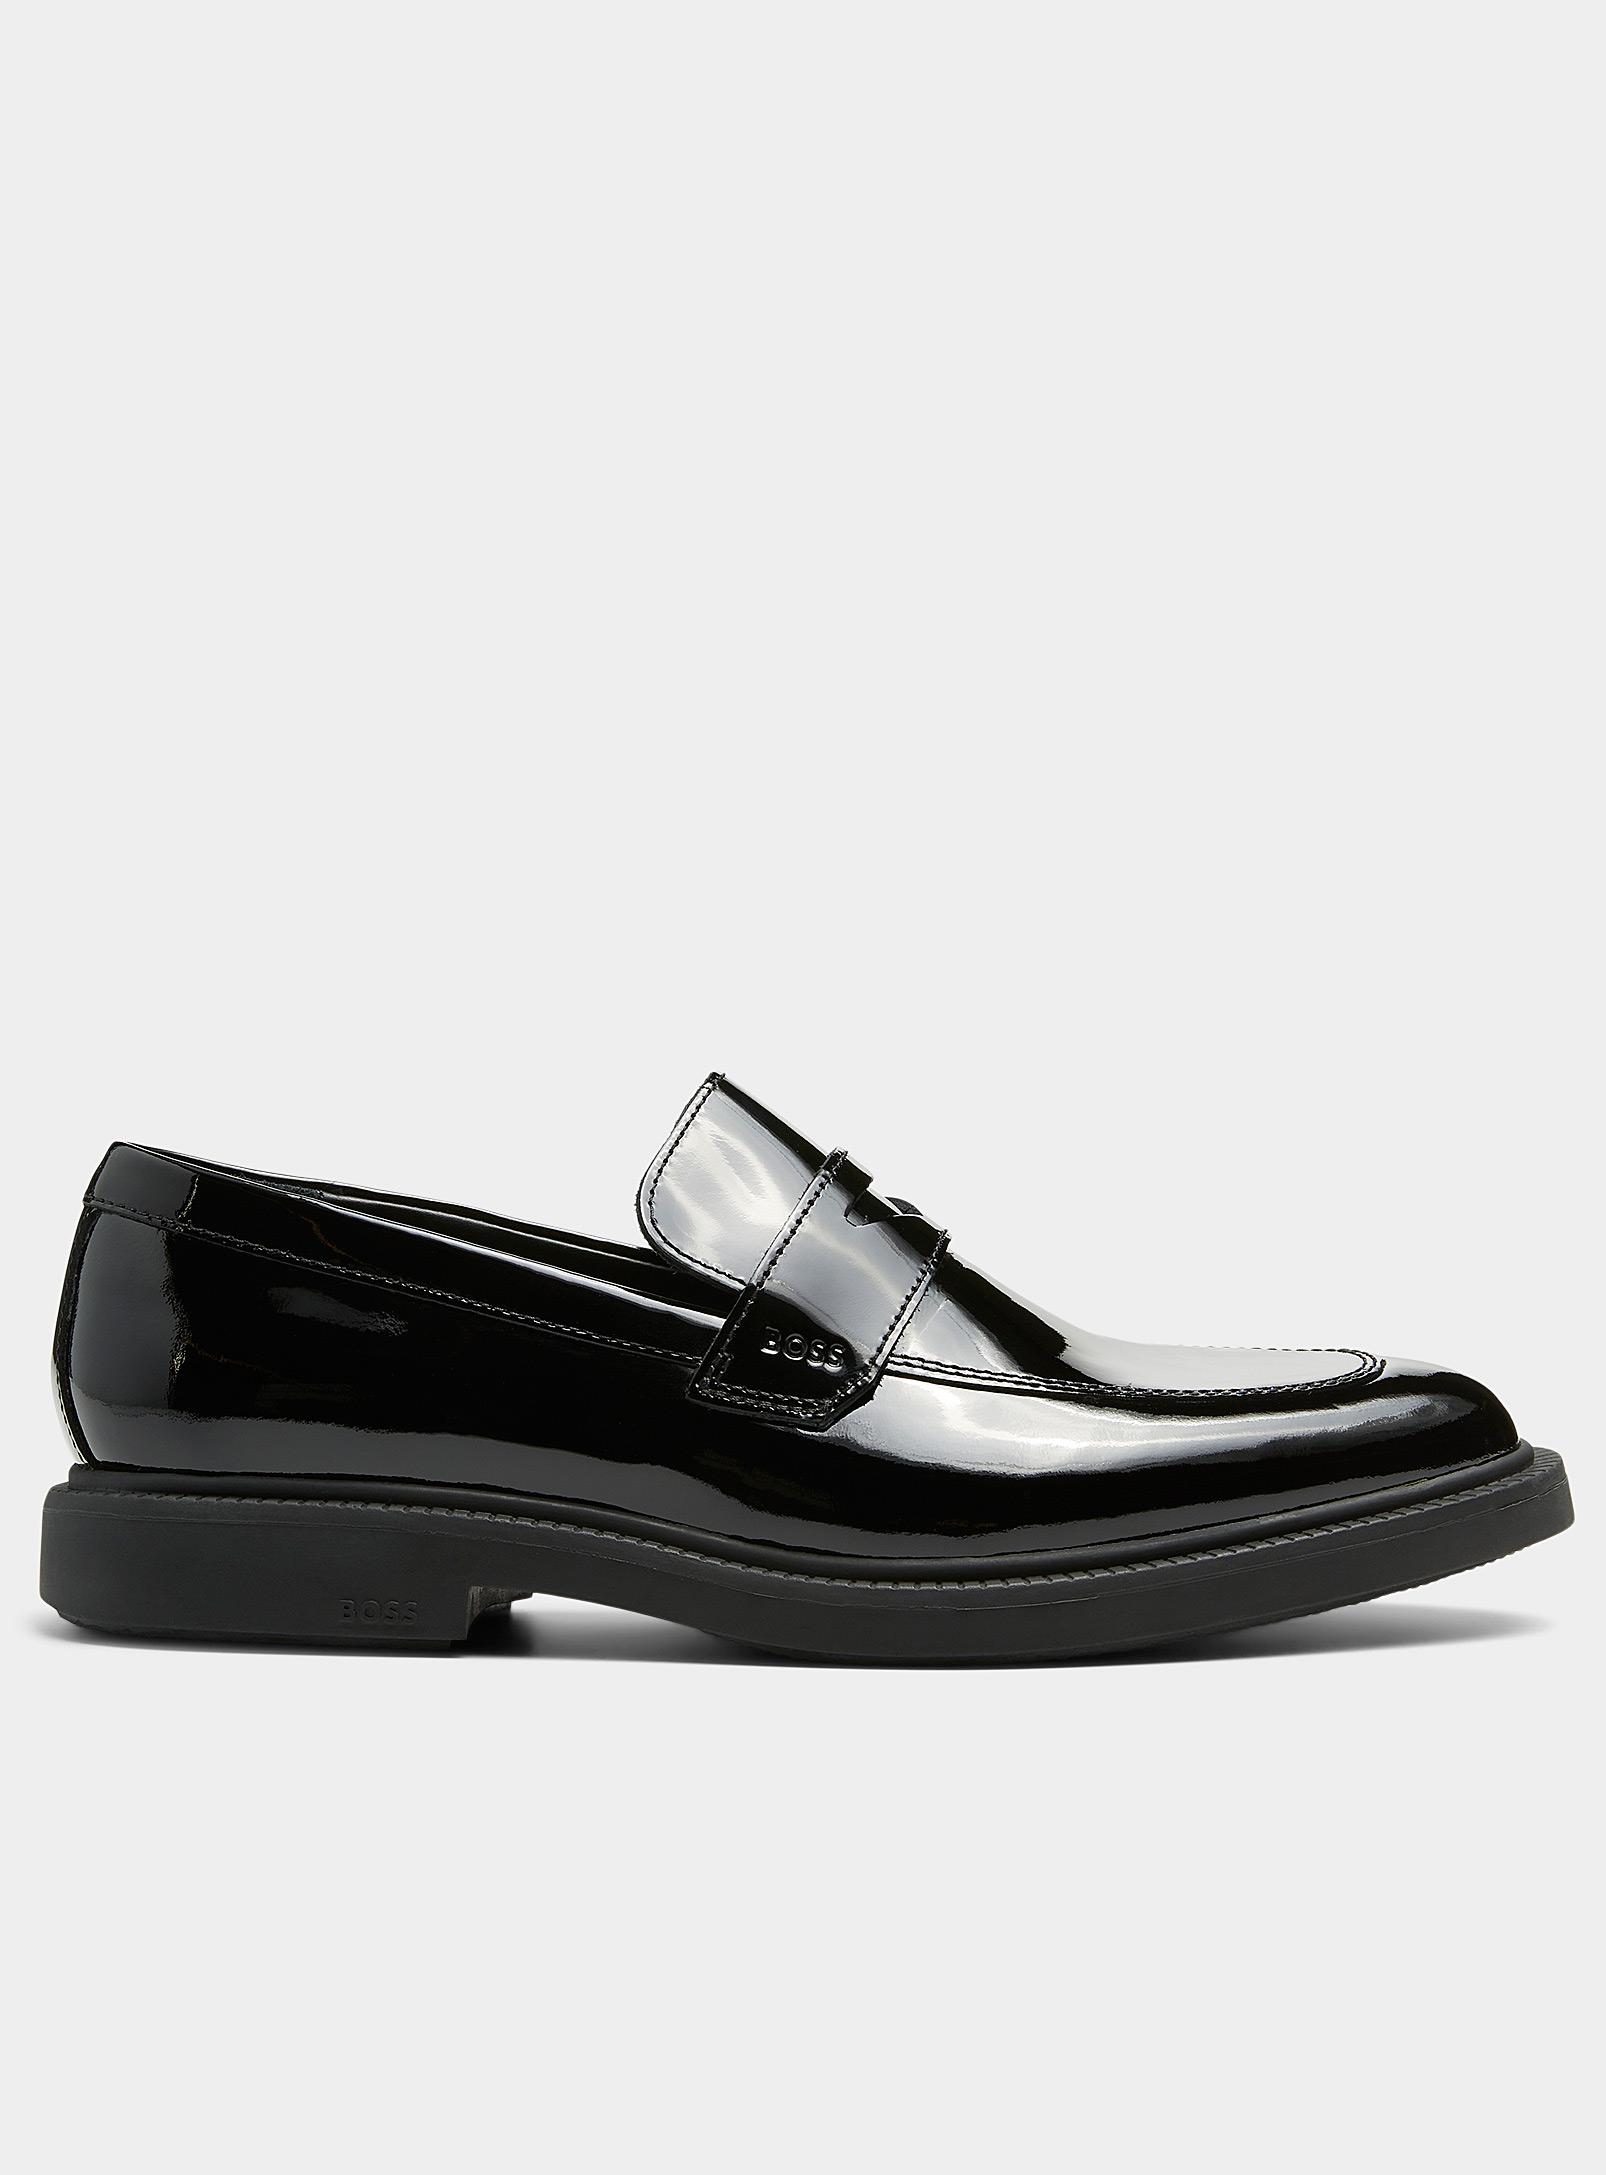 BOSS by HUGO BOSS Larry Patent Leather Penny Loafers Men in Black for ...